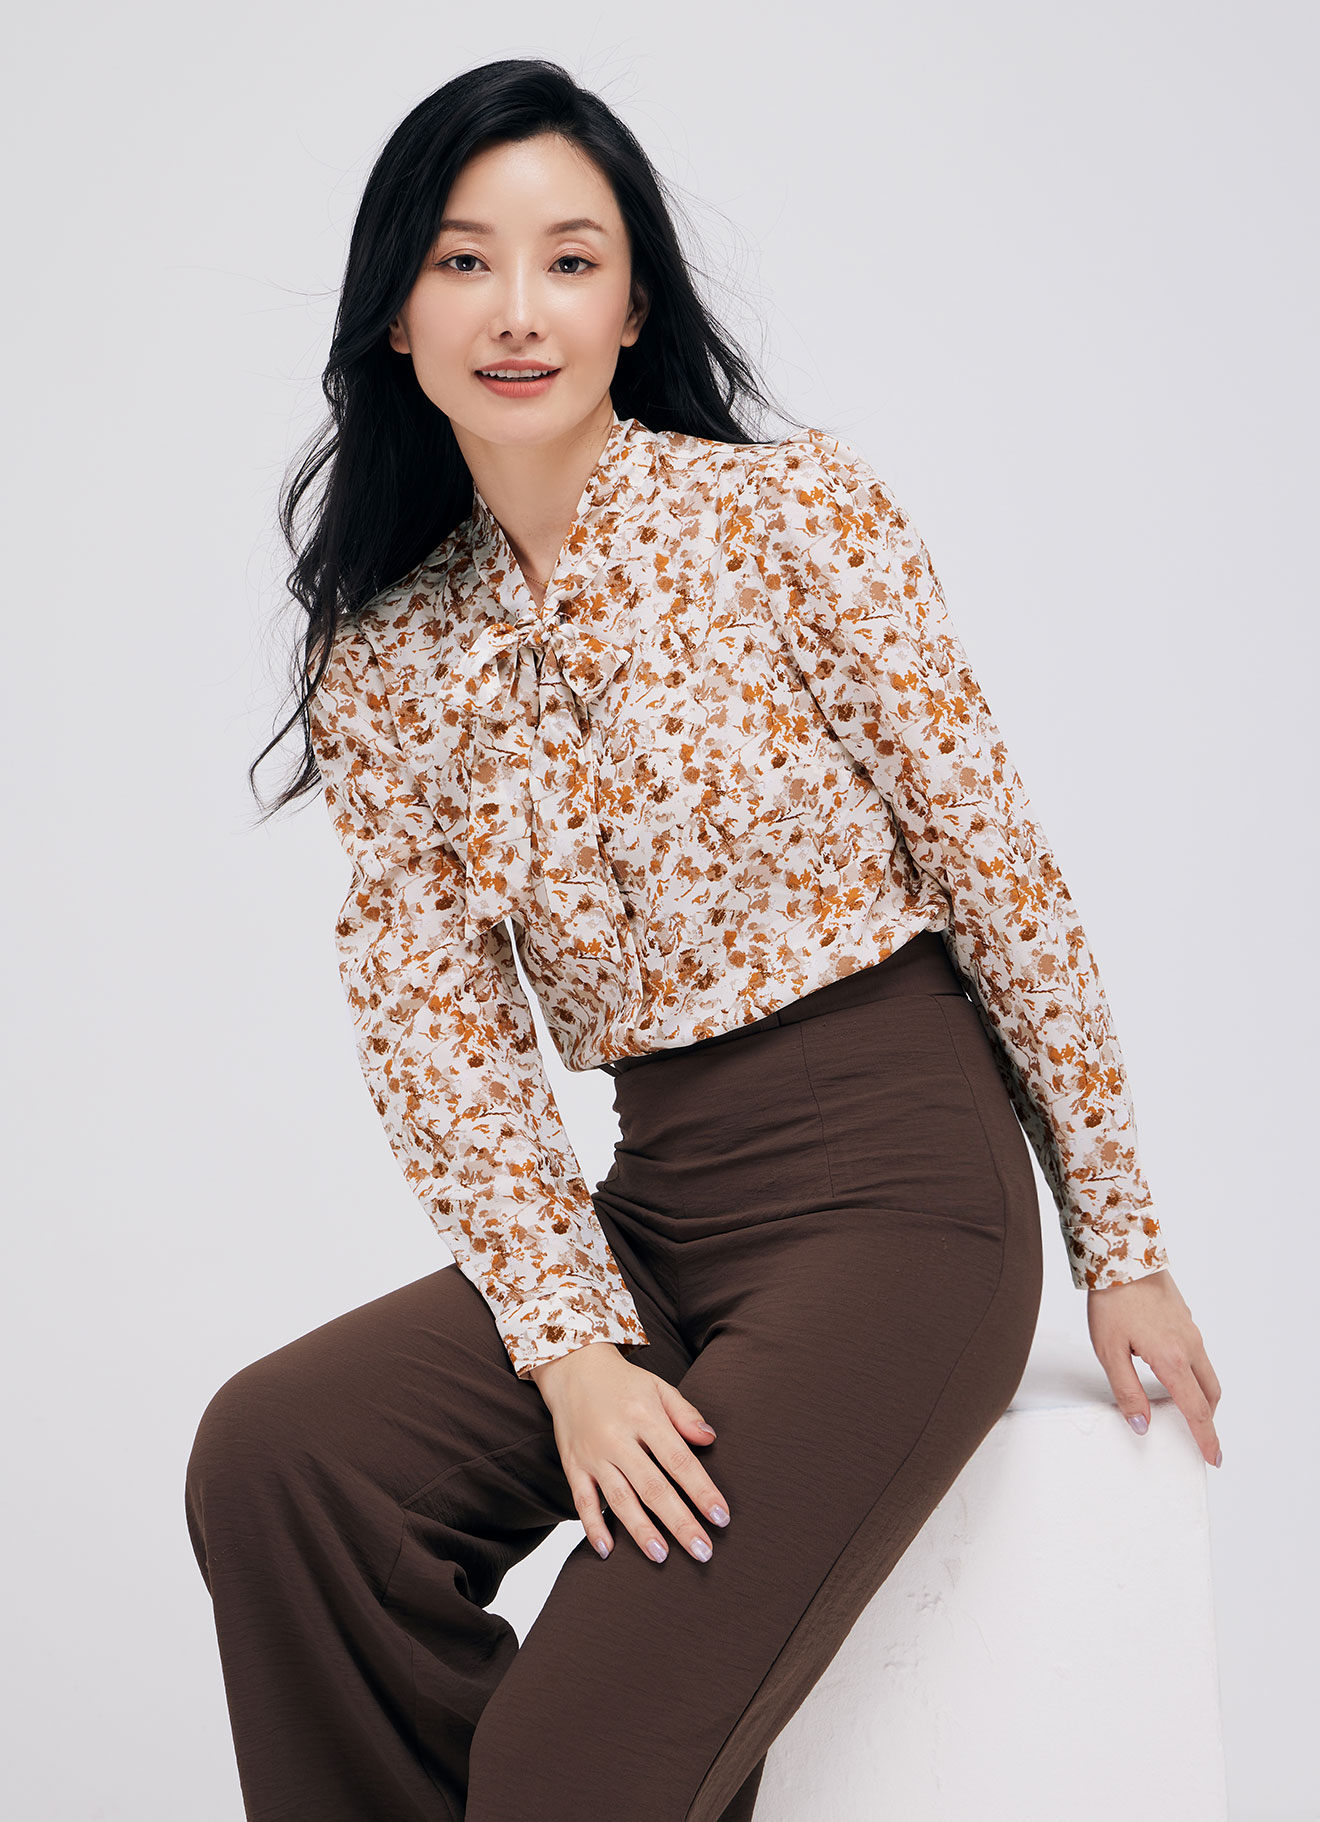 Mocha-Mousse  by Floral Printed Blouse